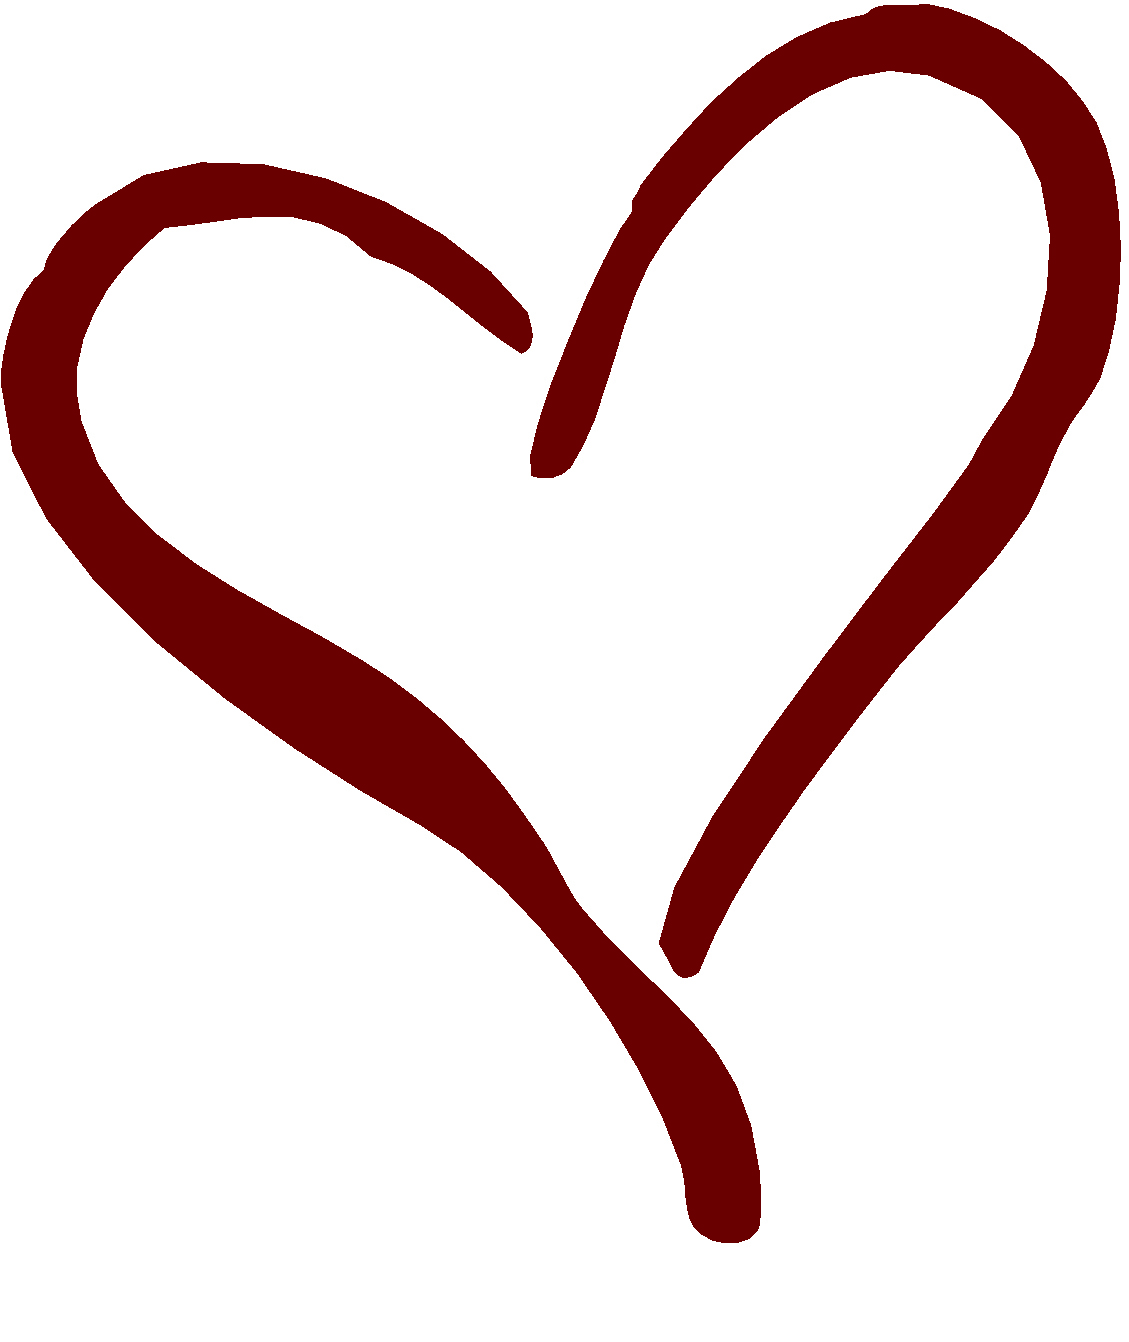 Image of open hearts clipart